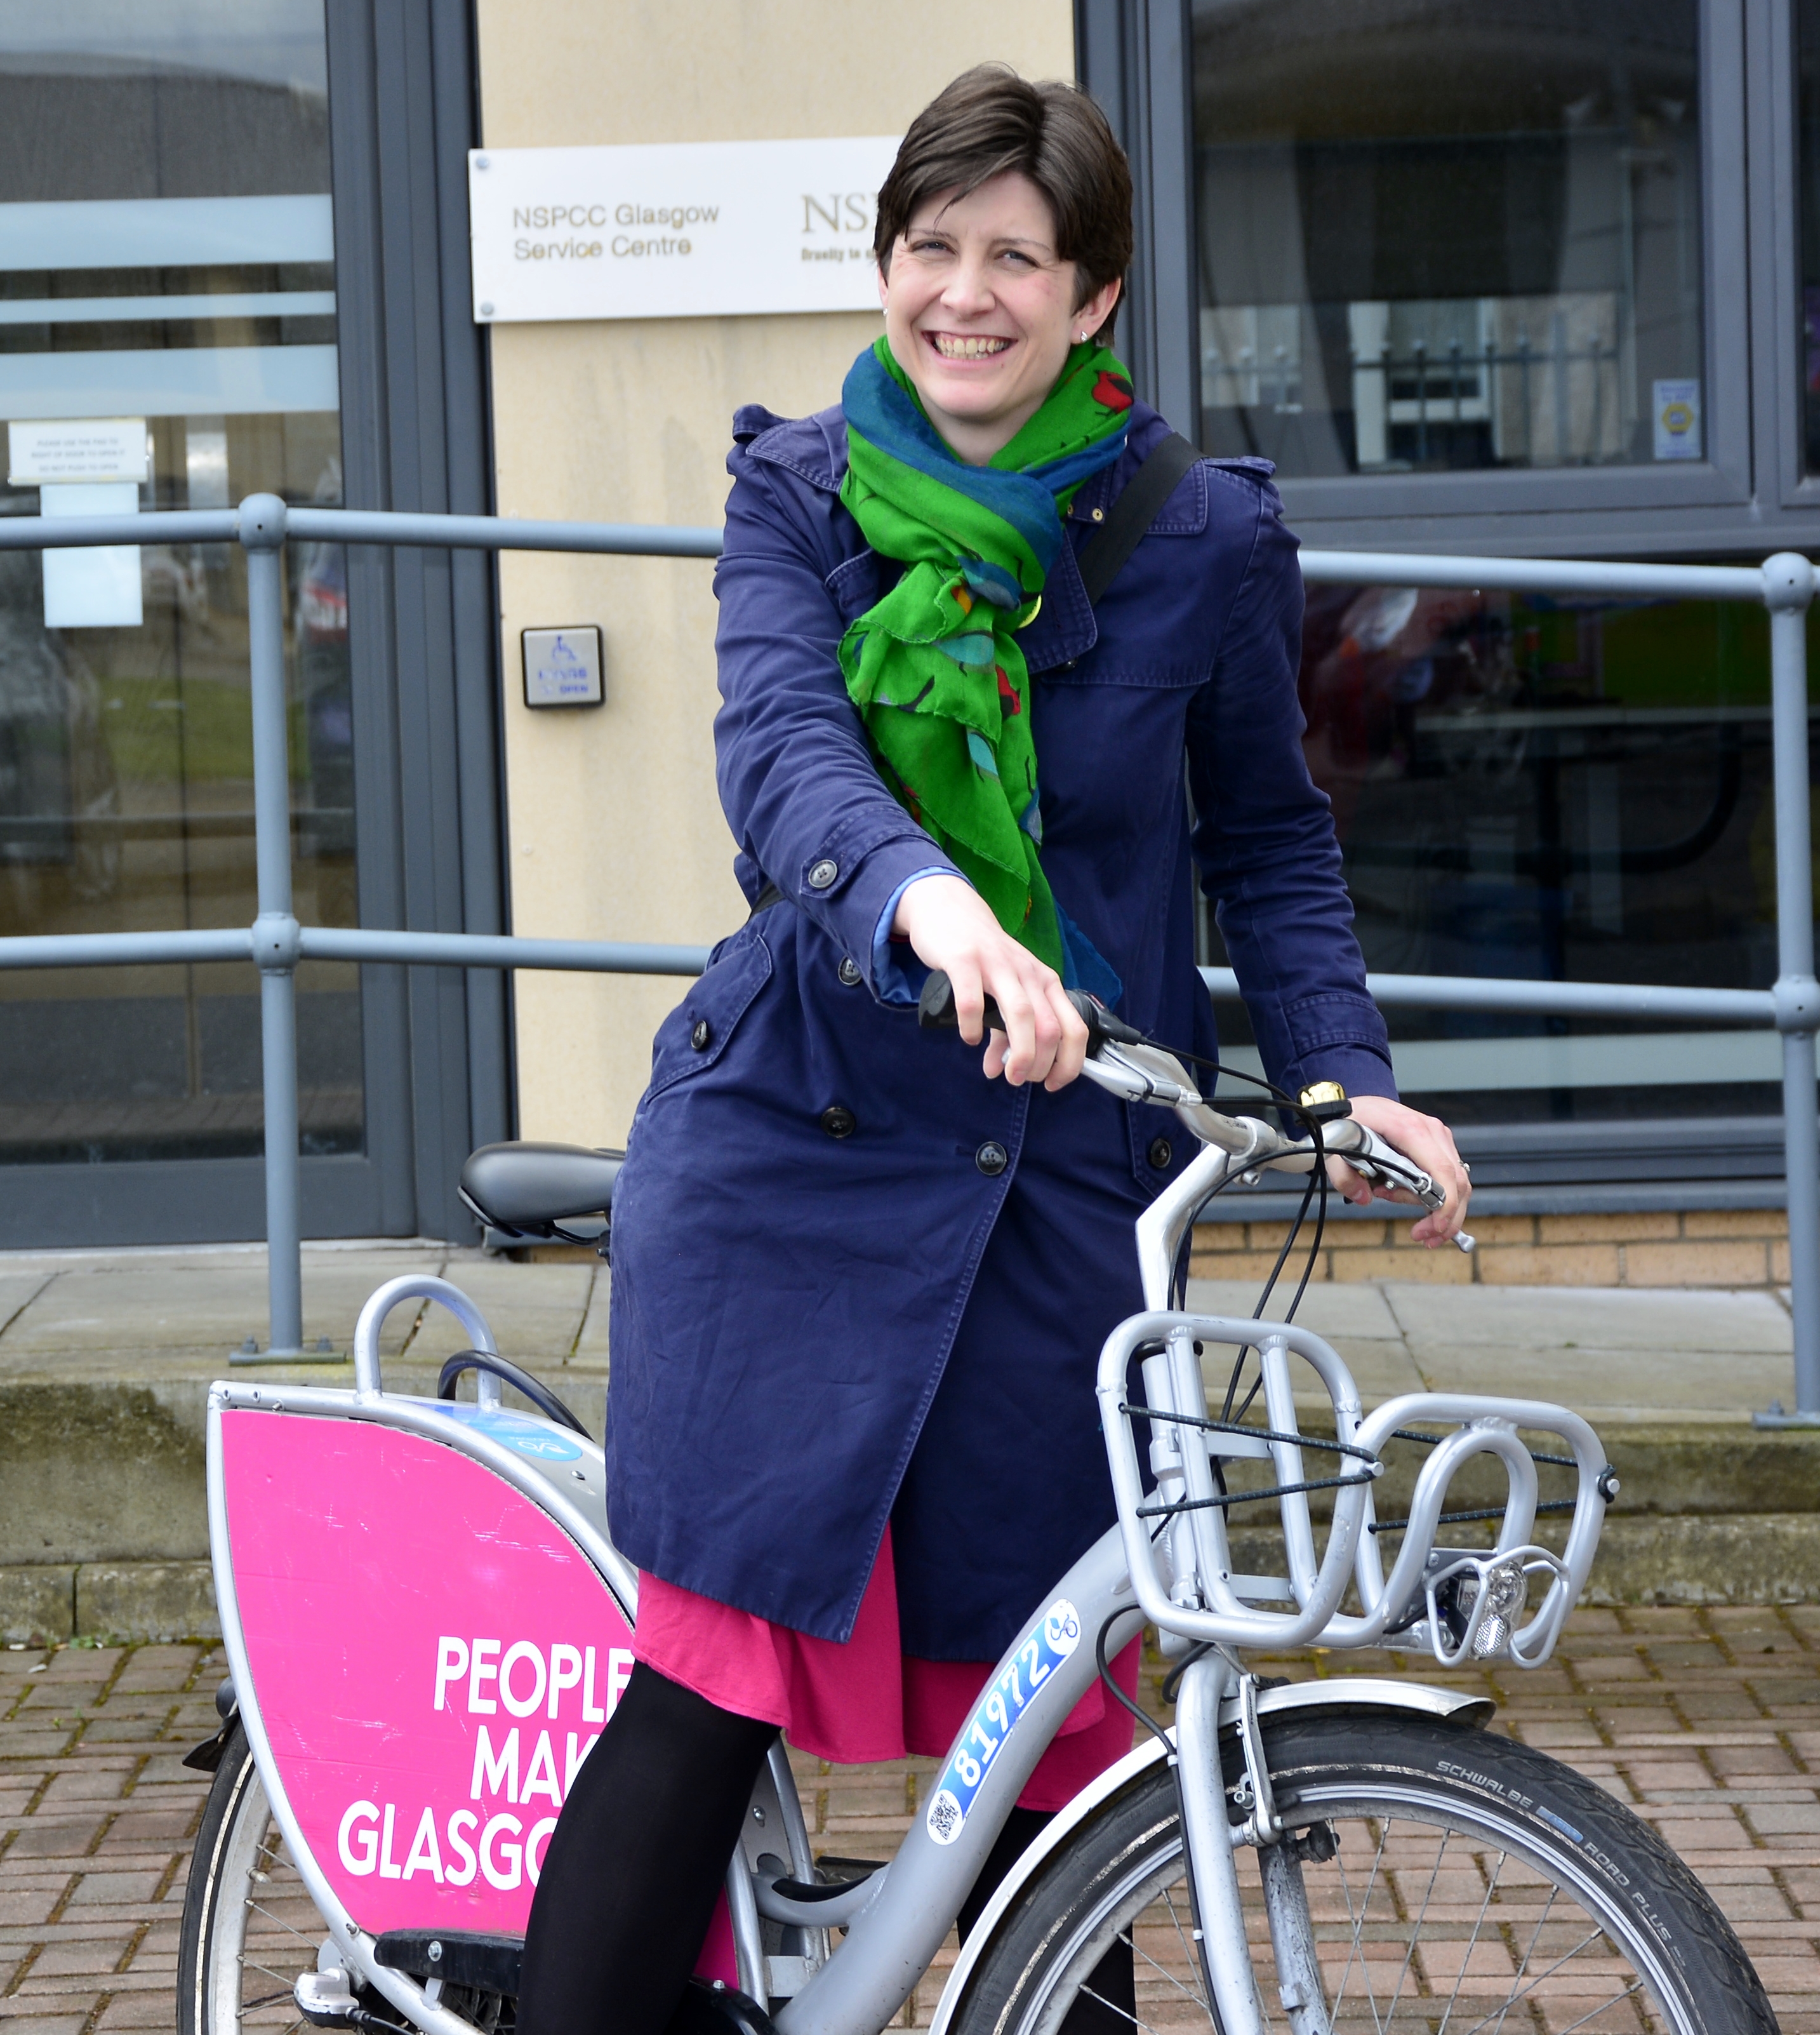 Alison Thewliss MP visits NSPCC Scotland project for young mothers